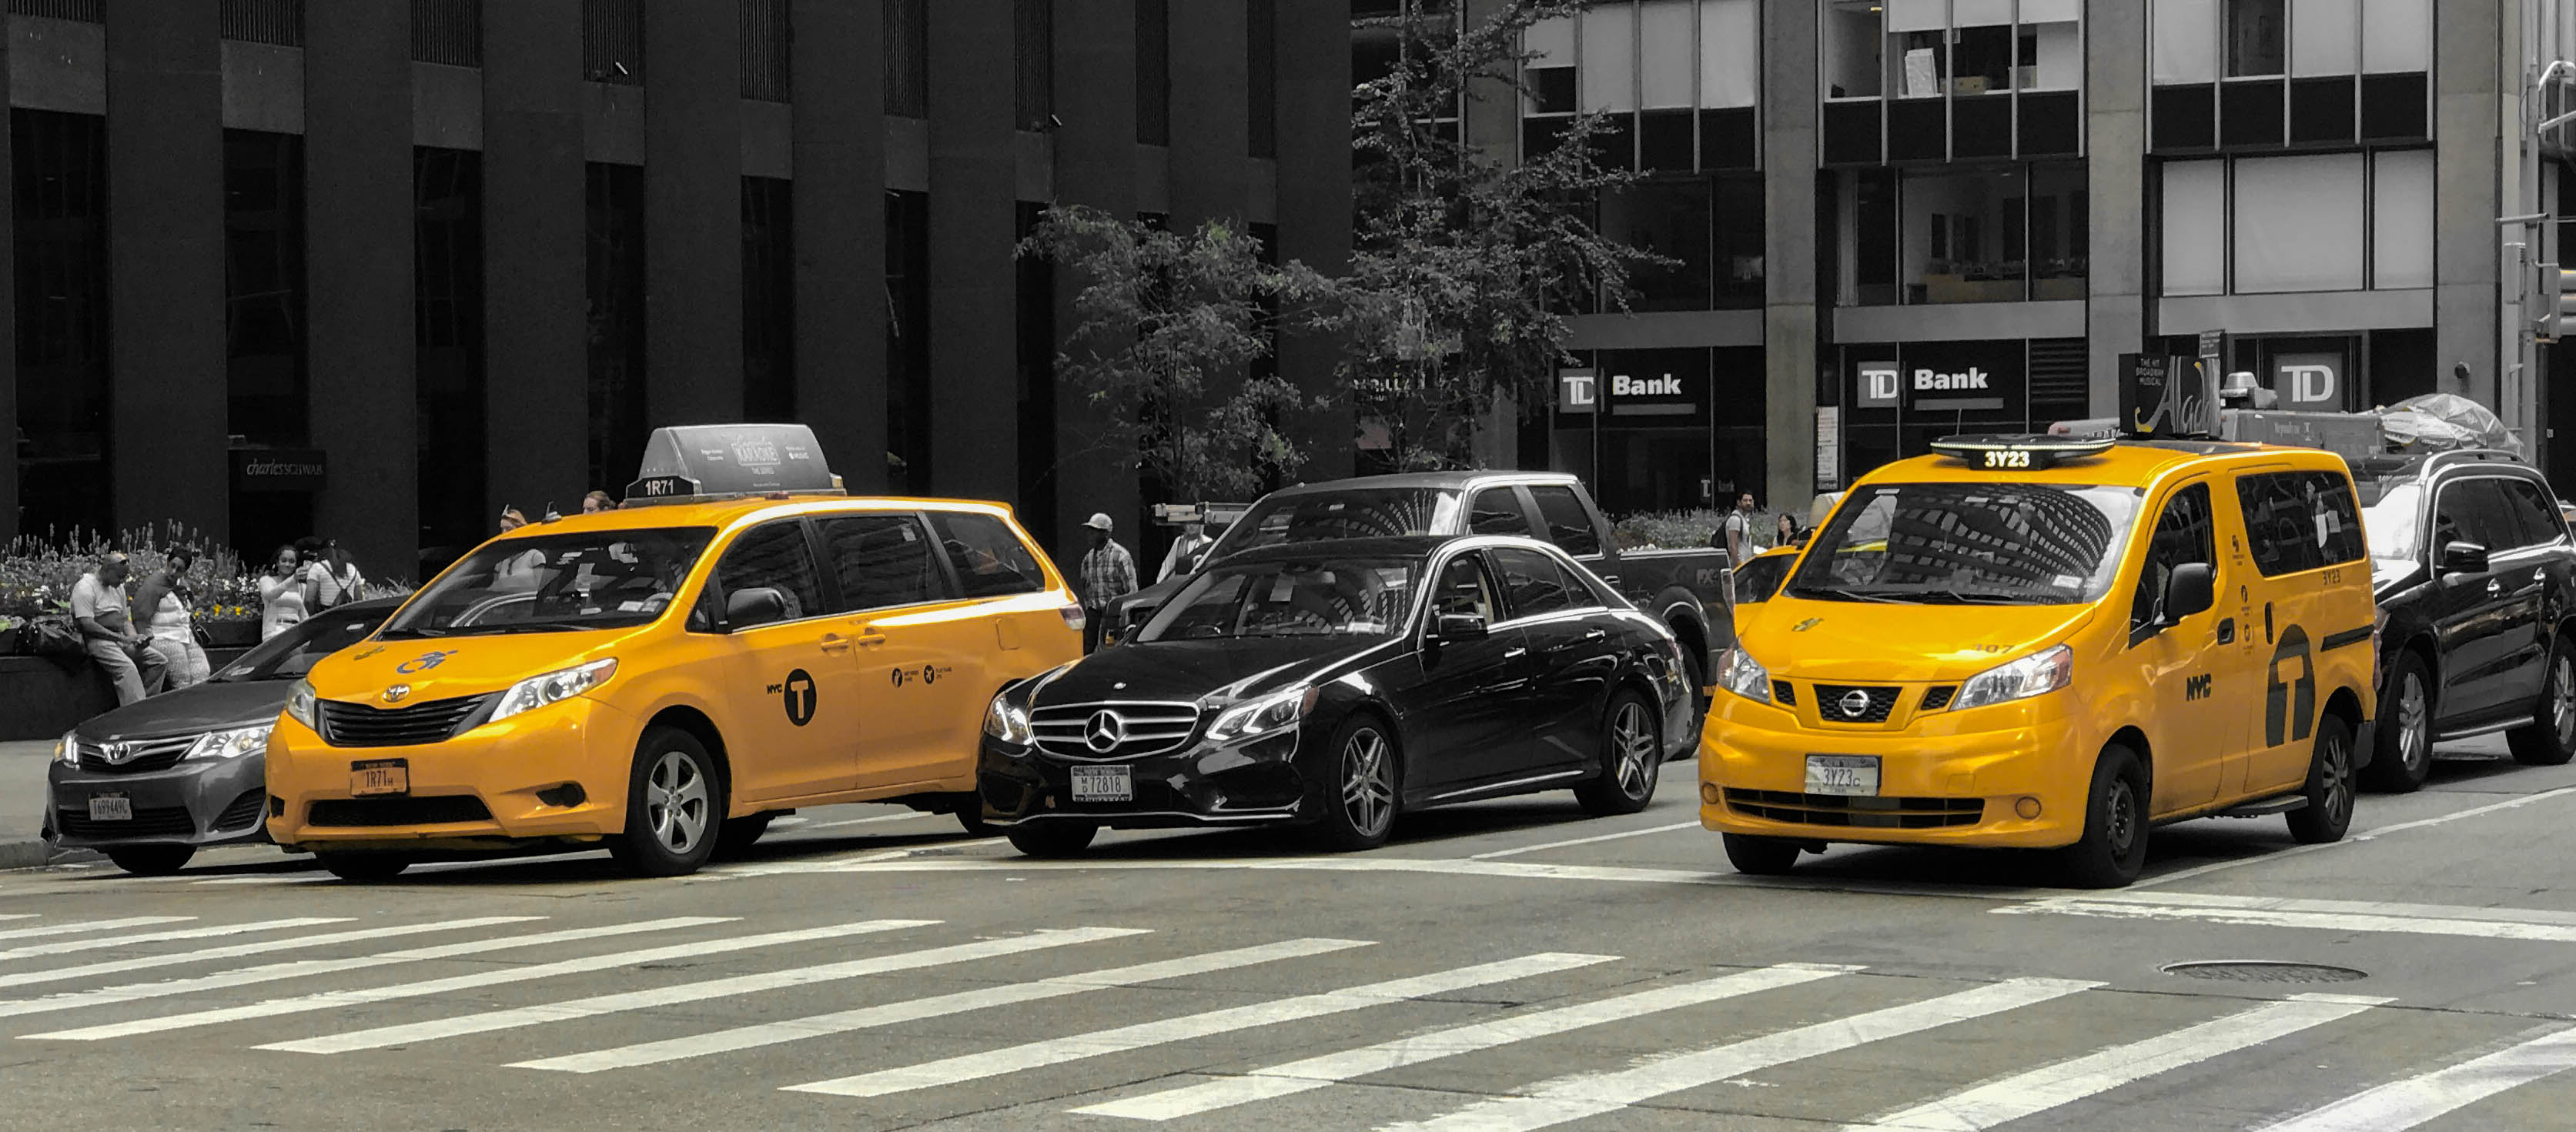 New York Taxi's Picture taken in New York City  by Tony Keogh Photography